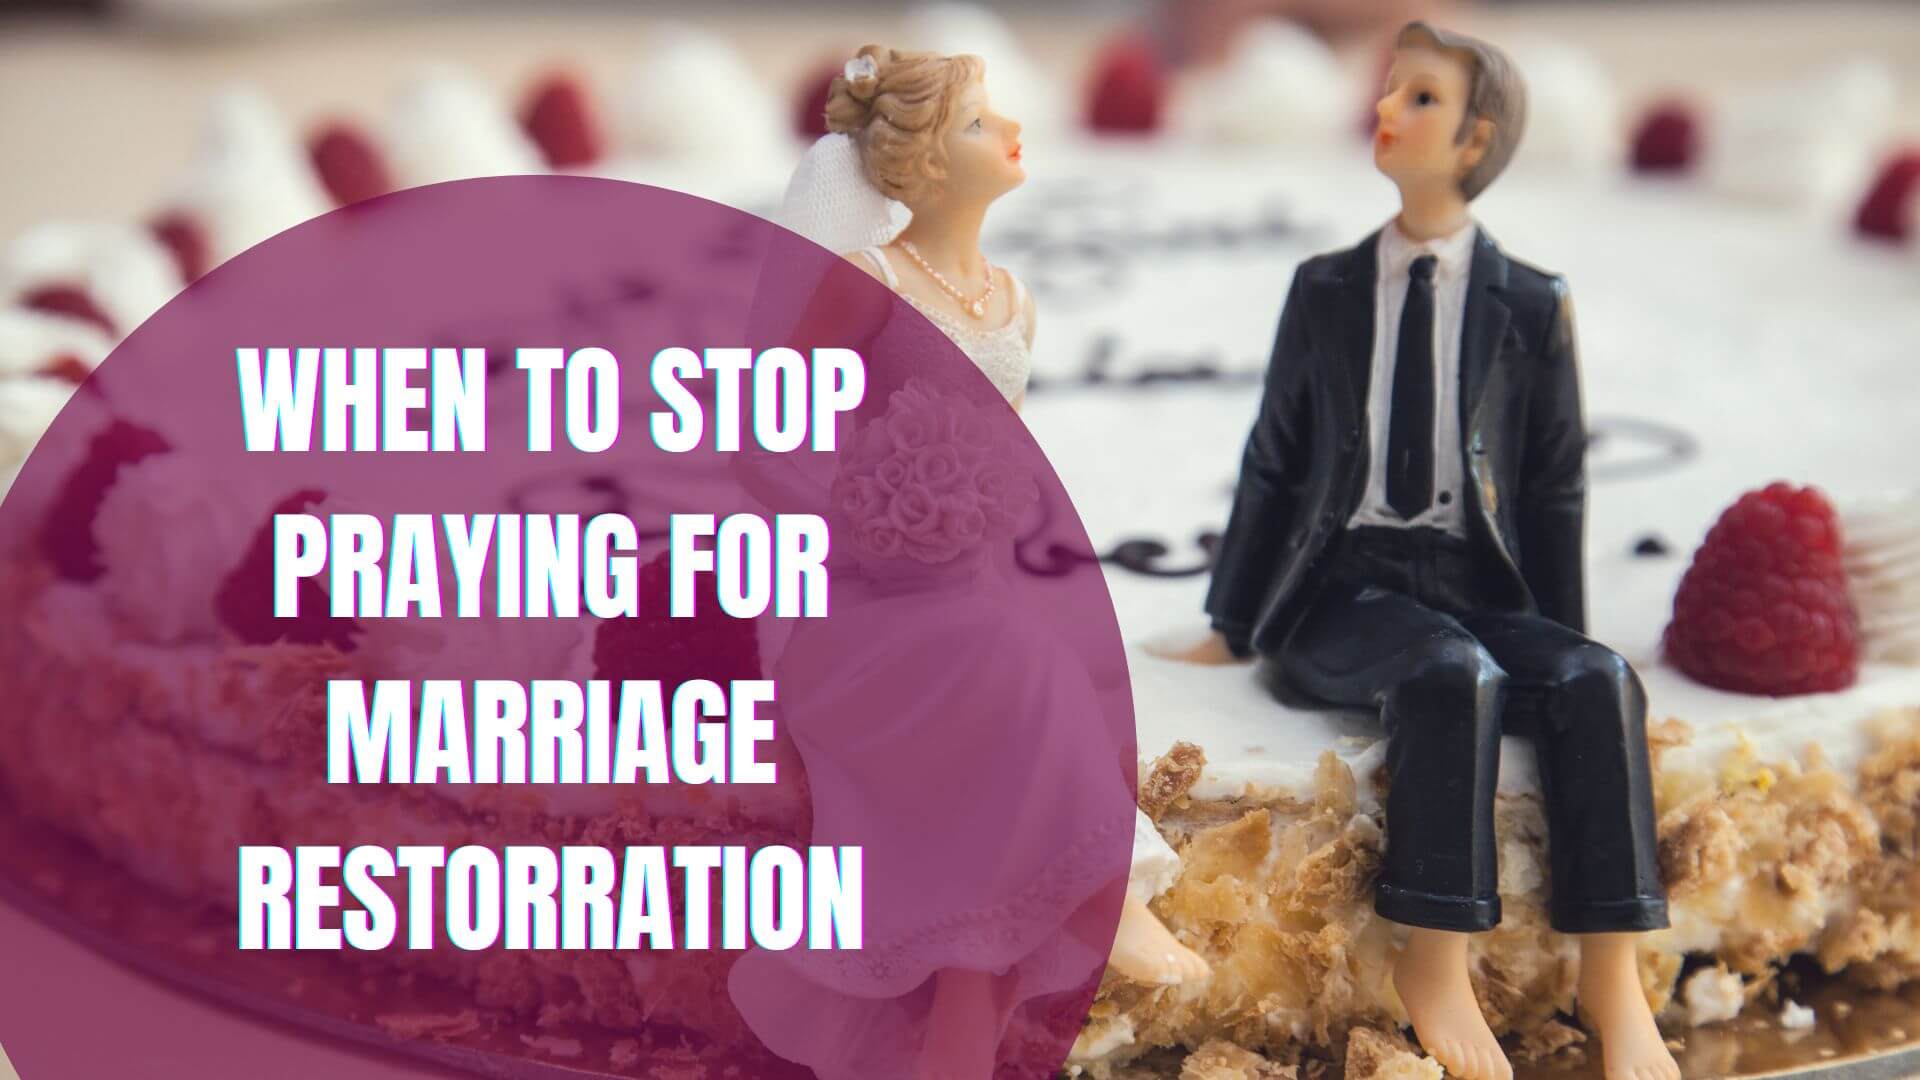 When To Stop Praying For Marriage Restoration